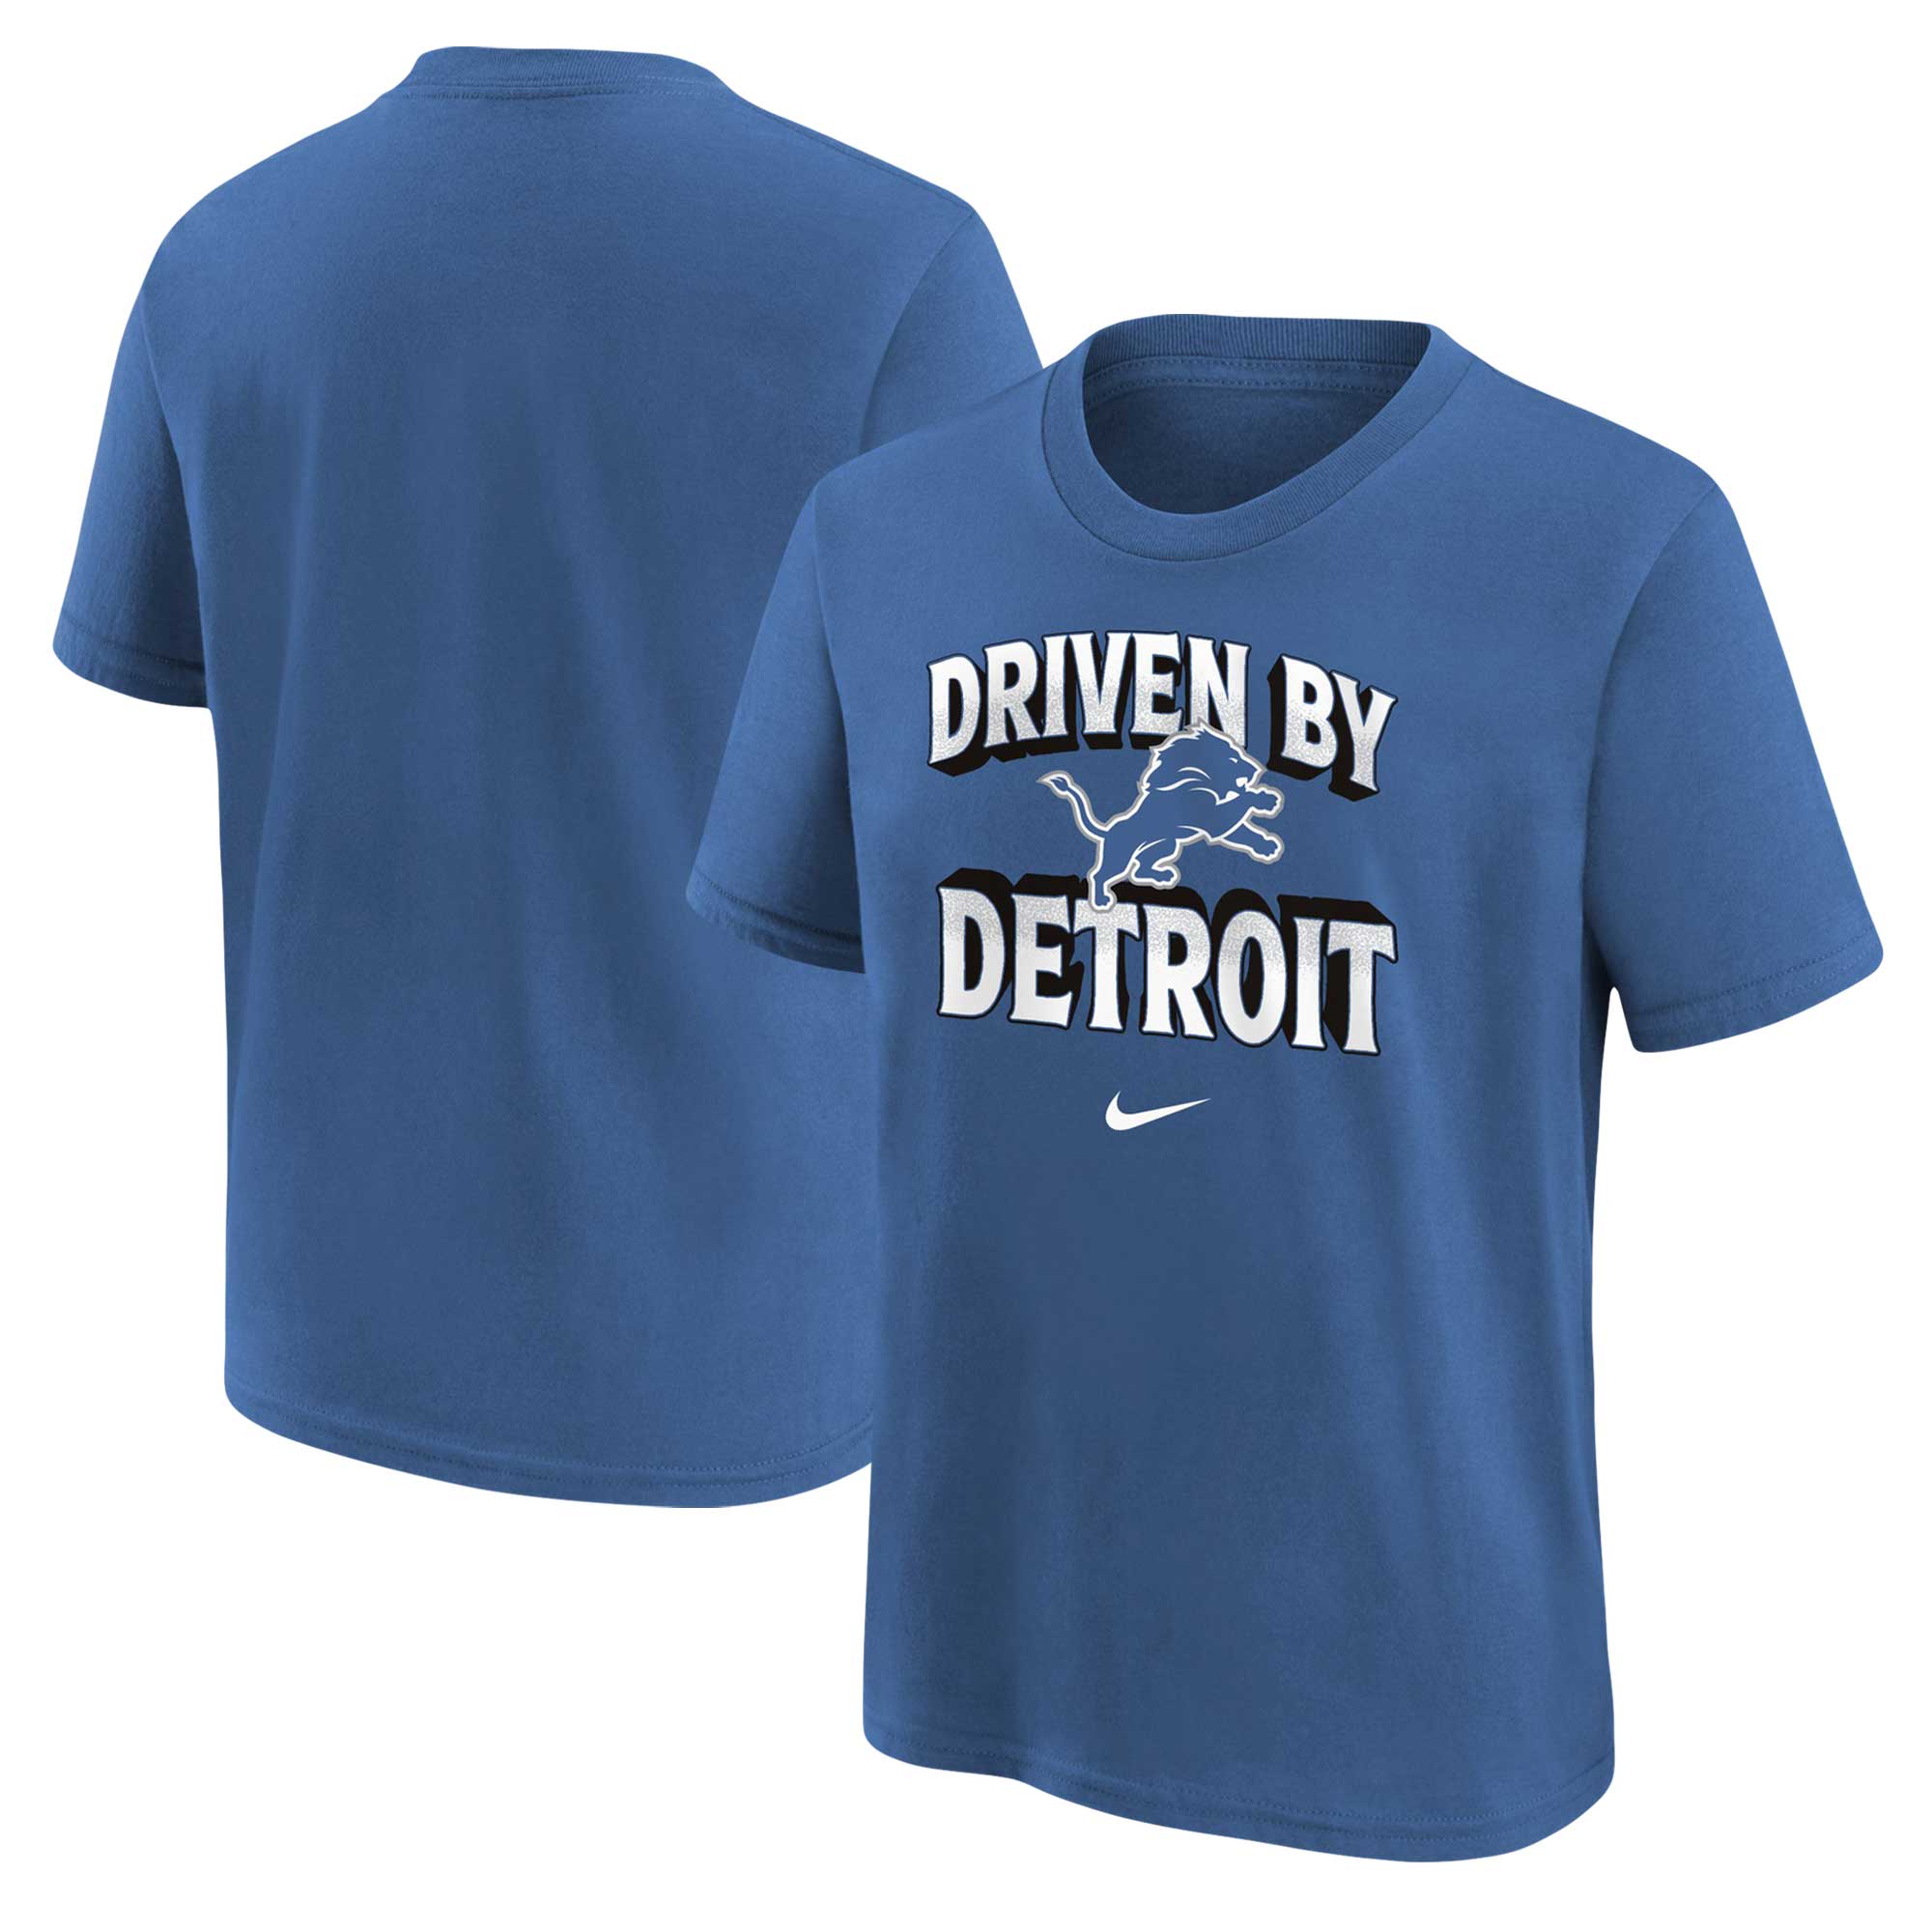 Driven By Detroit Lions T-Shirt - Anynee